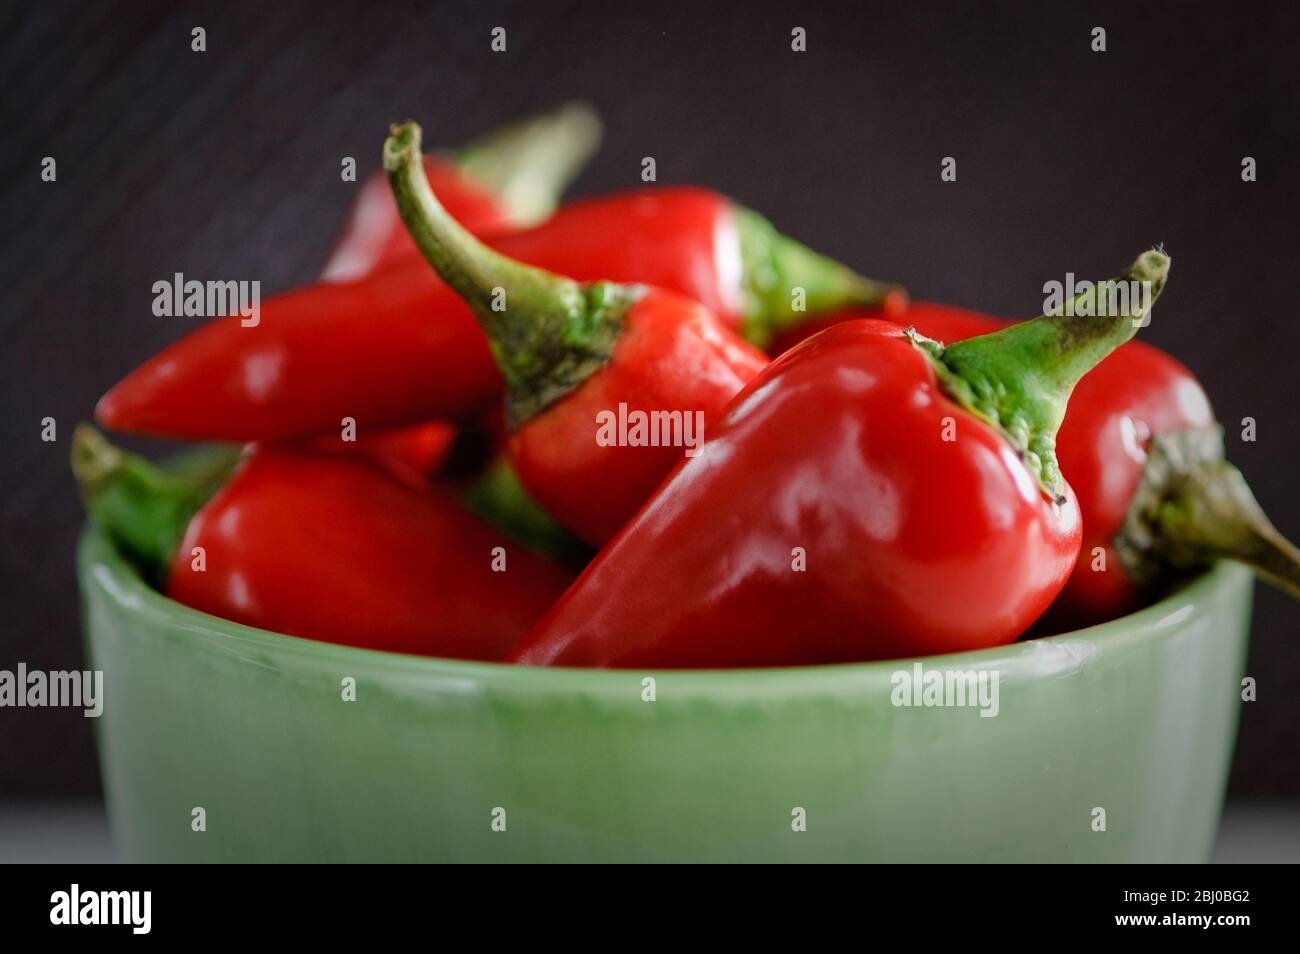 Shiny red chilli peppers in green bowl. Shorter depth of field. - Stock Photo